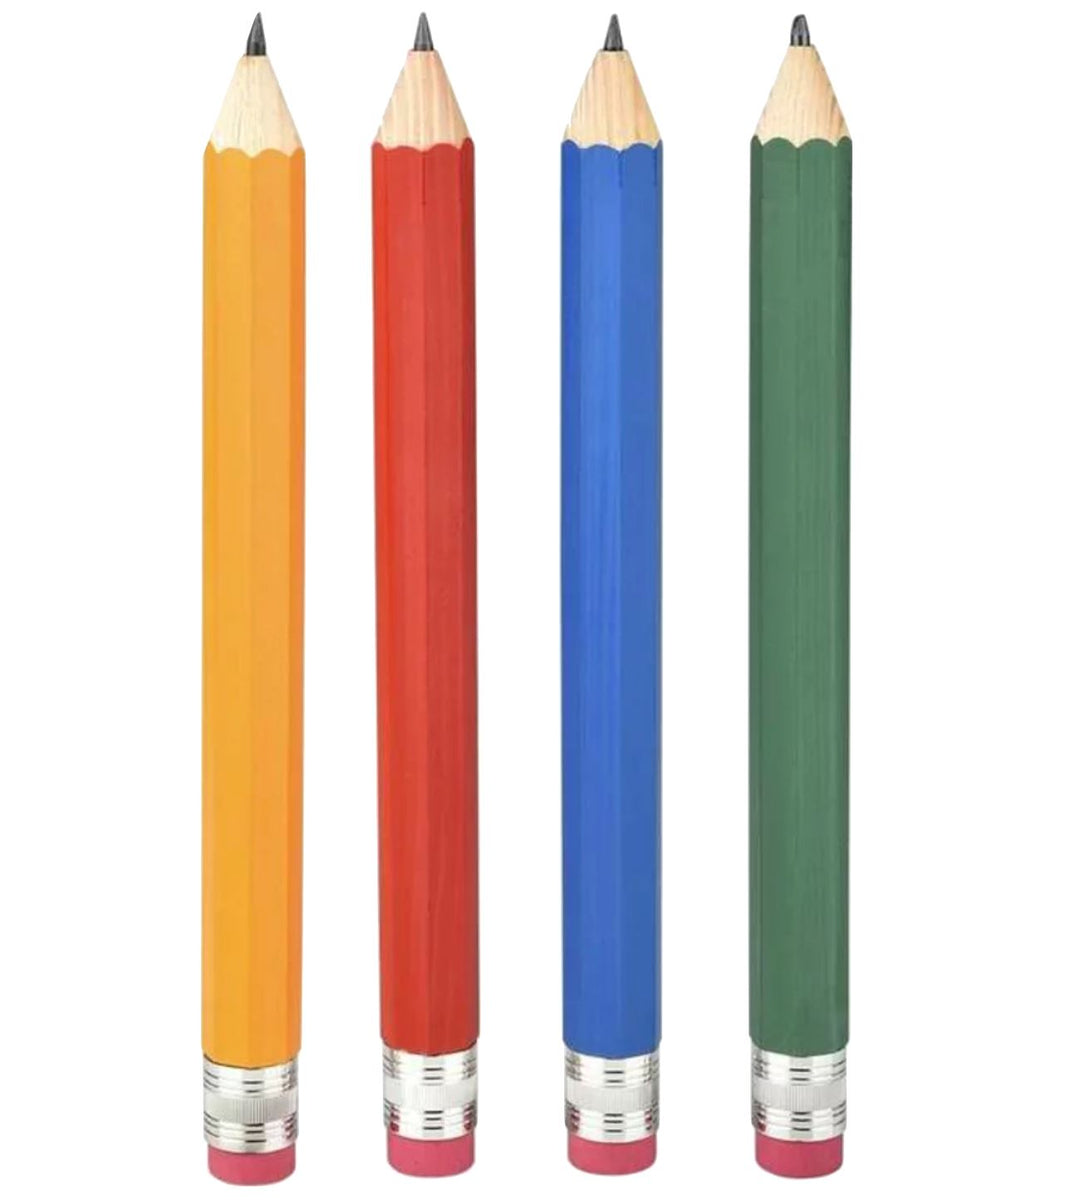  ibasenice 10 Pcs Giant Drawing Pencils Wooden Pencil Giant  Pencil Prop Pencils for Kids Green Giant Pencil Novelty Pencils Cool Pencils  Big Eencils Funny Pencils Party 35c Bamboo Photo Brush 